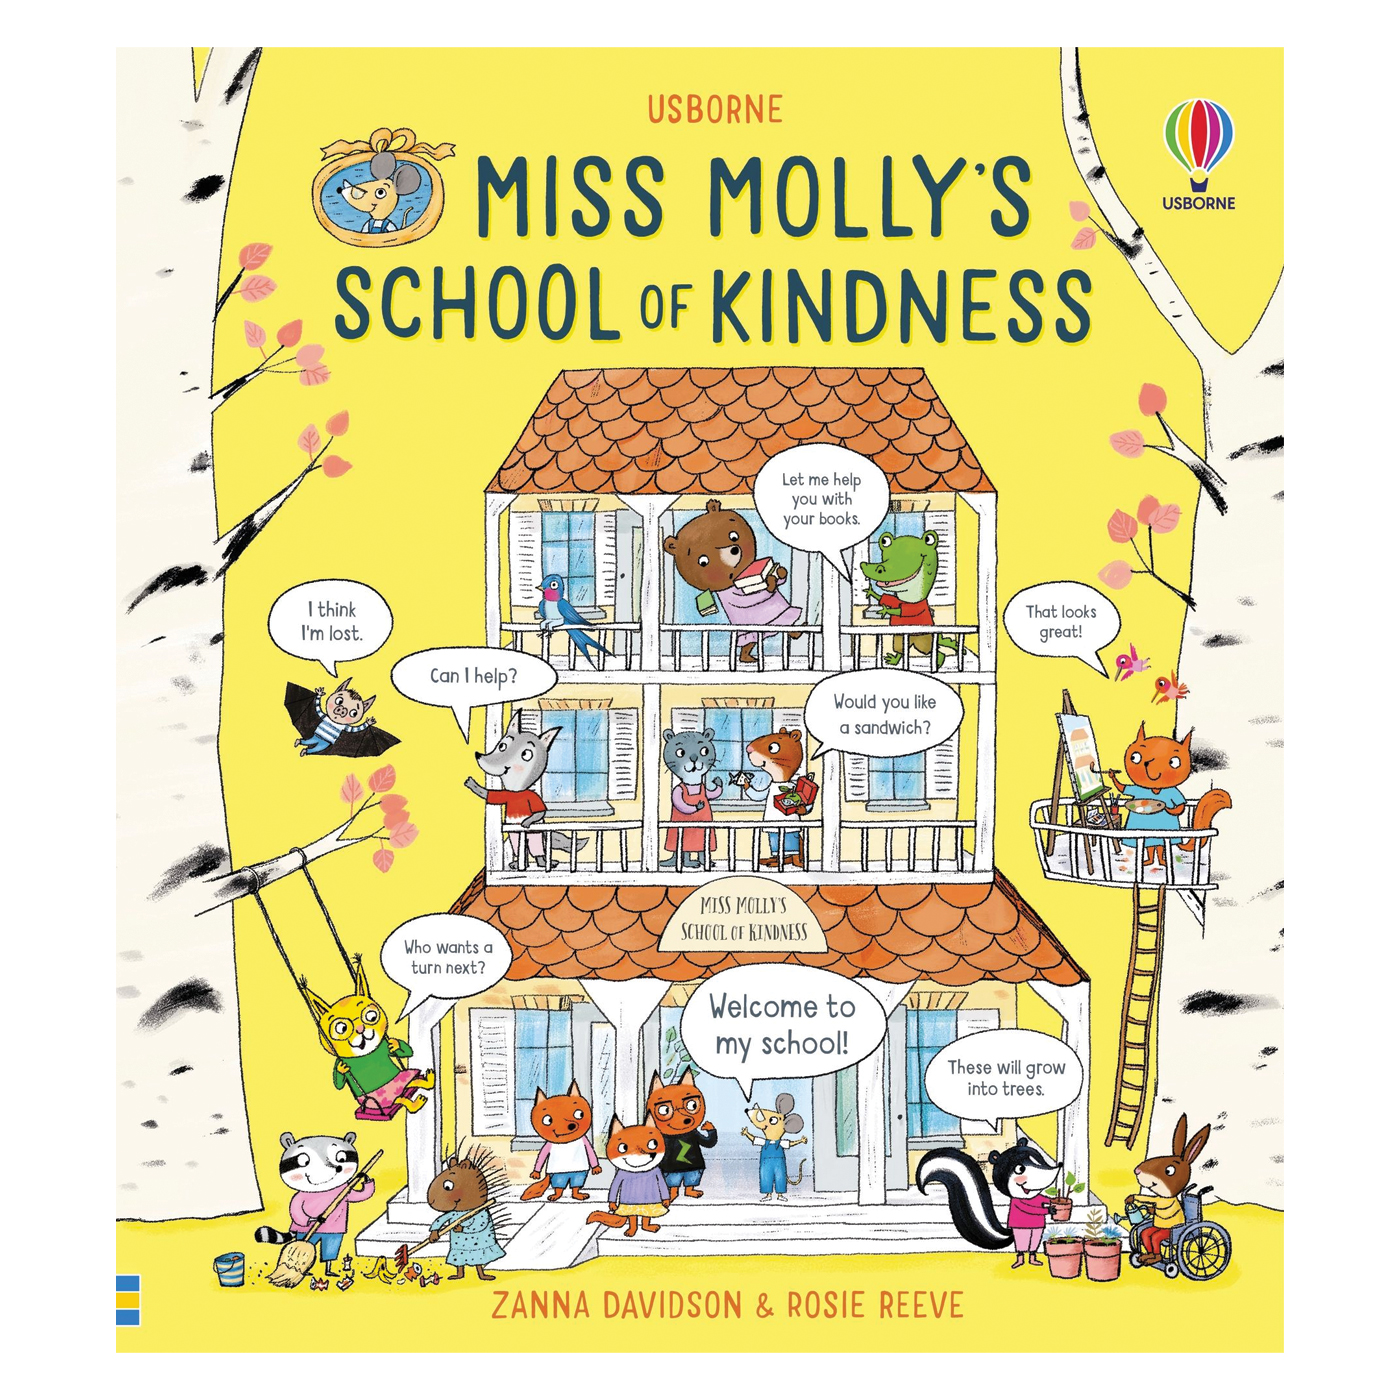  Miss Molly's School of Kindness